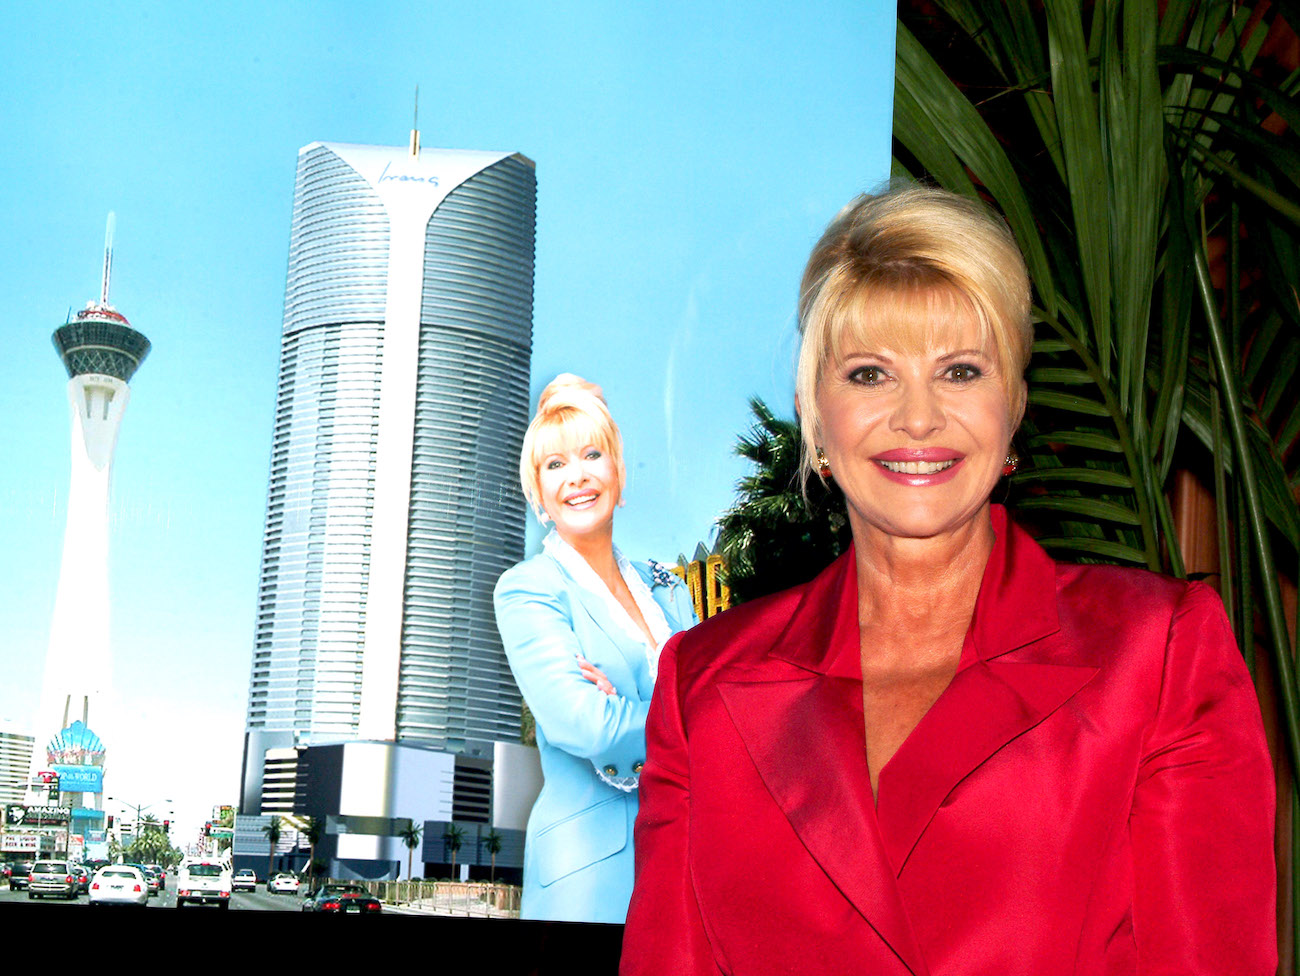 Ivana Trump in a red blazer in front of a photo of herself